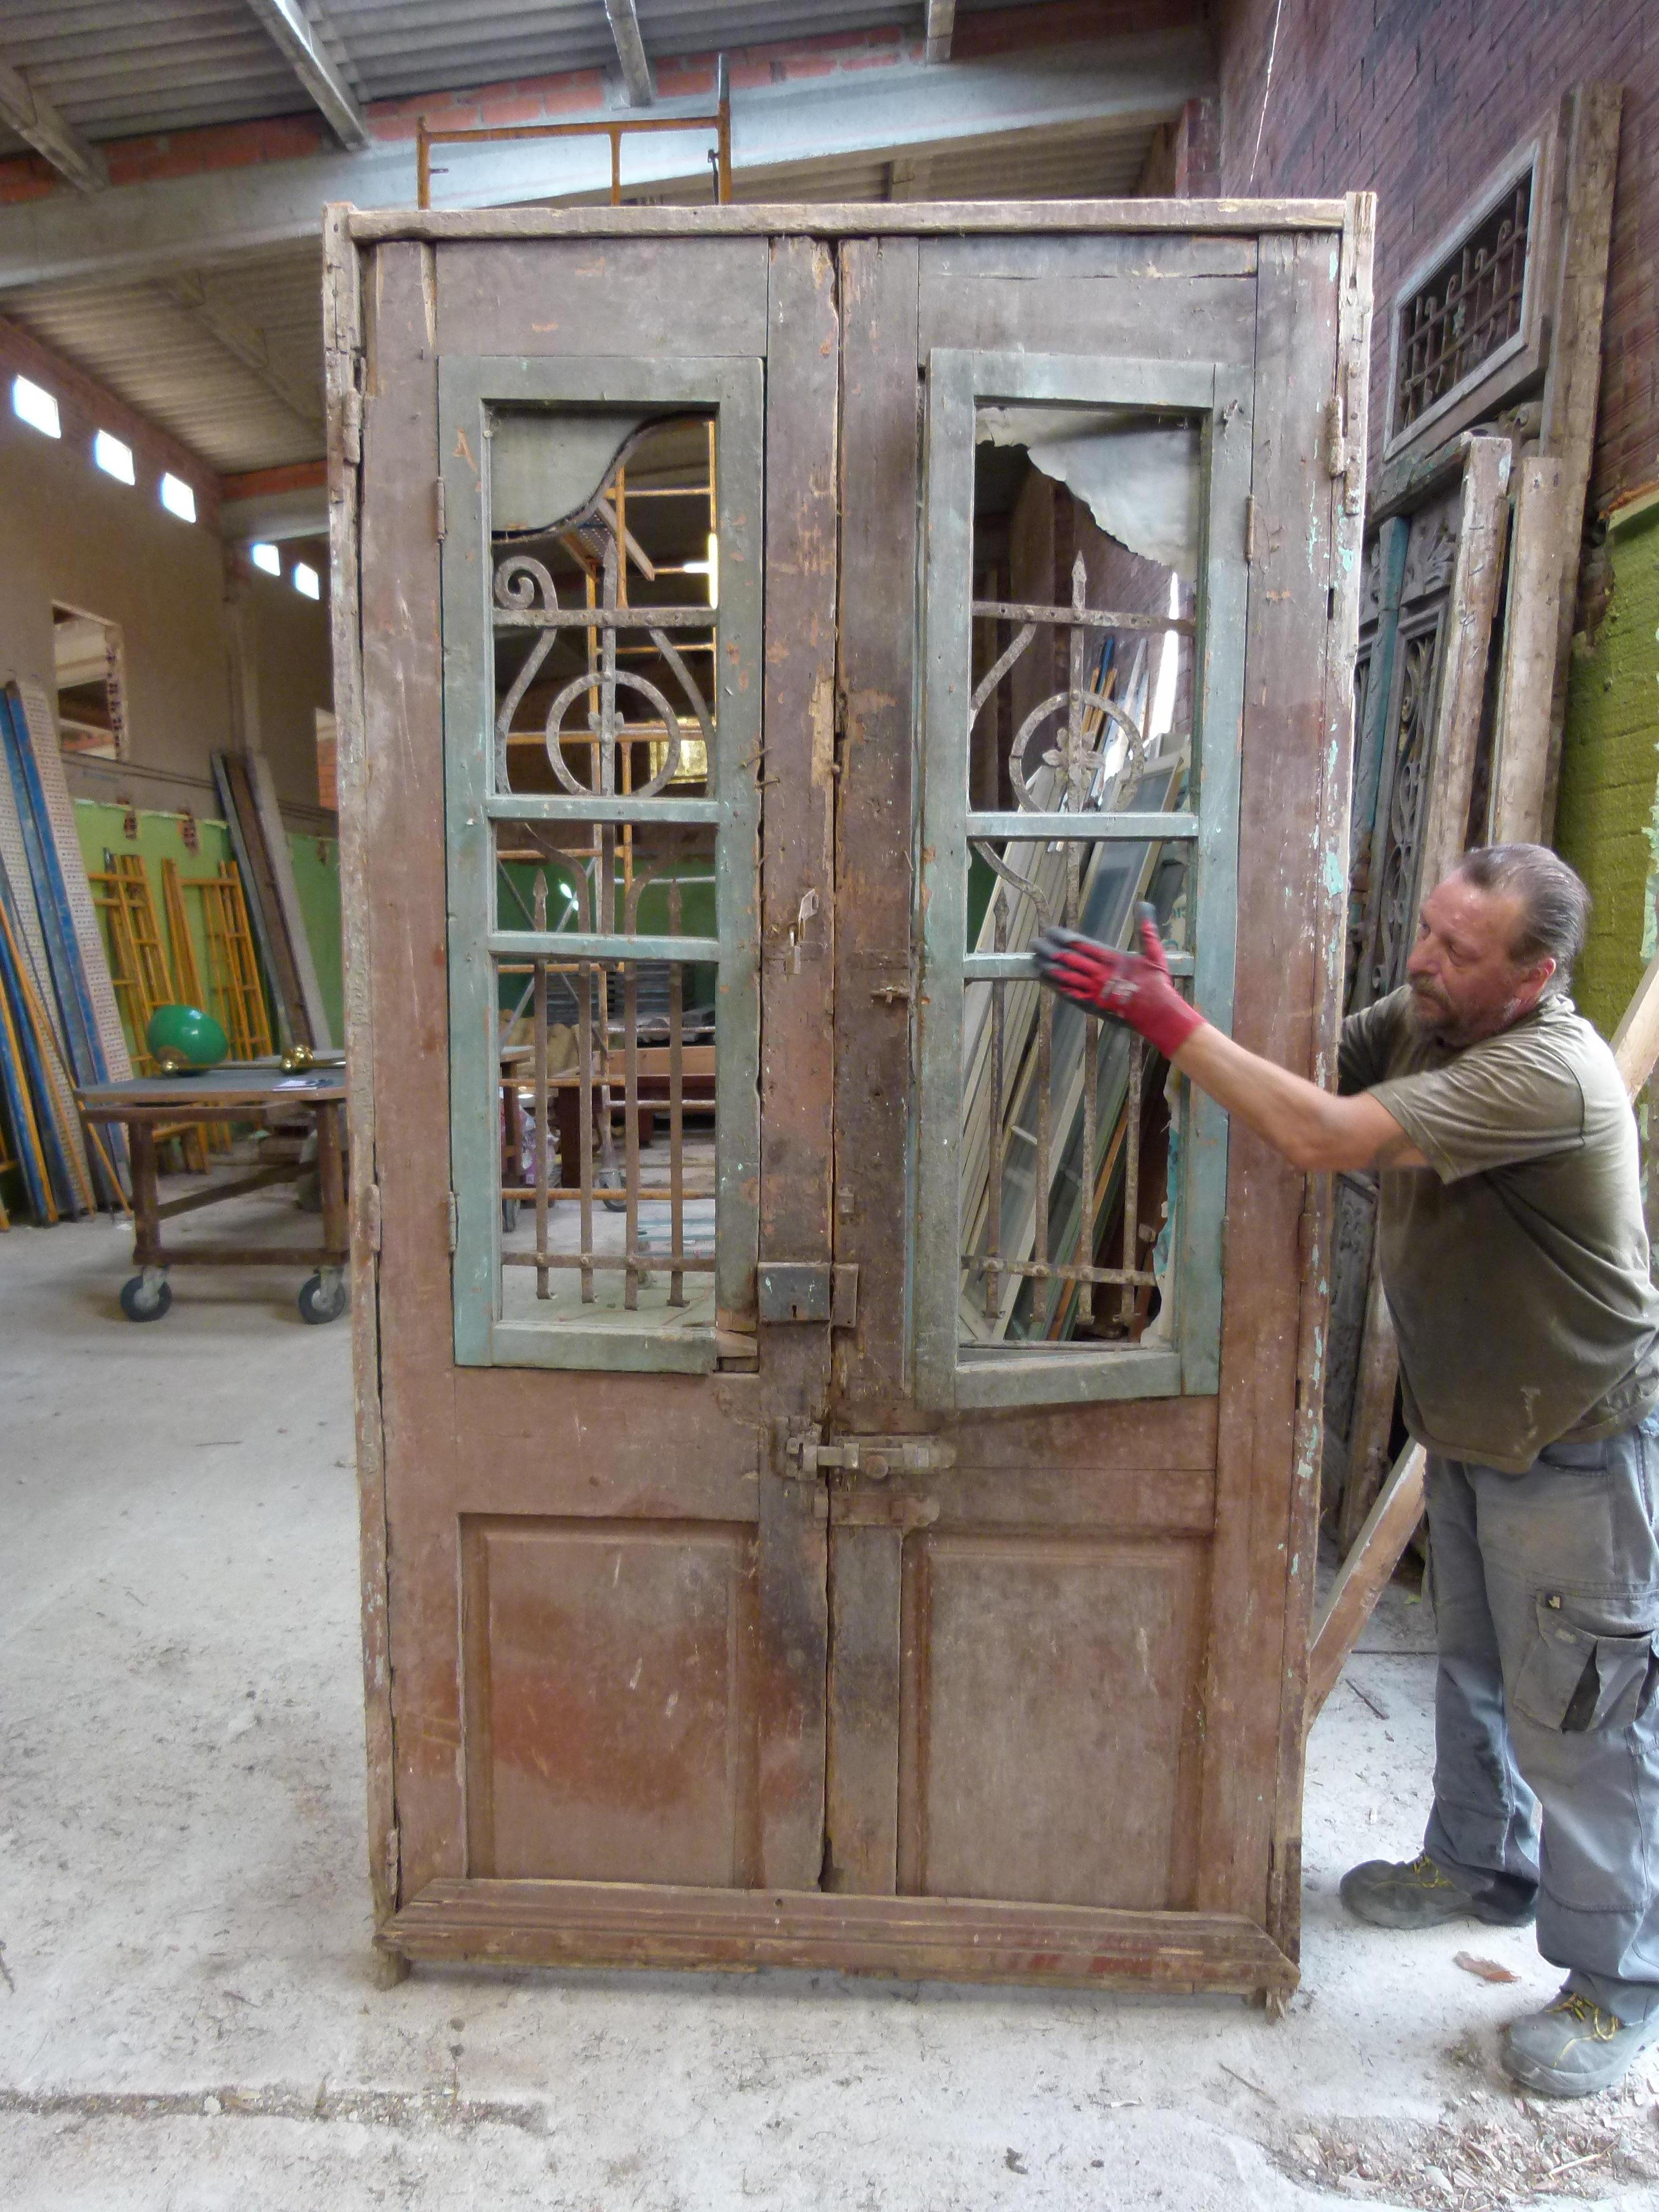 19th century double front door with patina in Art Nouveau style from Catalonien, Spain.
 Carved wood and cast iron typical from this period.
The door is framed and working but needs some restoration as some parts are damaged.
The original patina